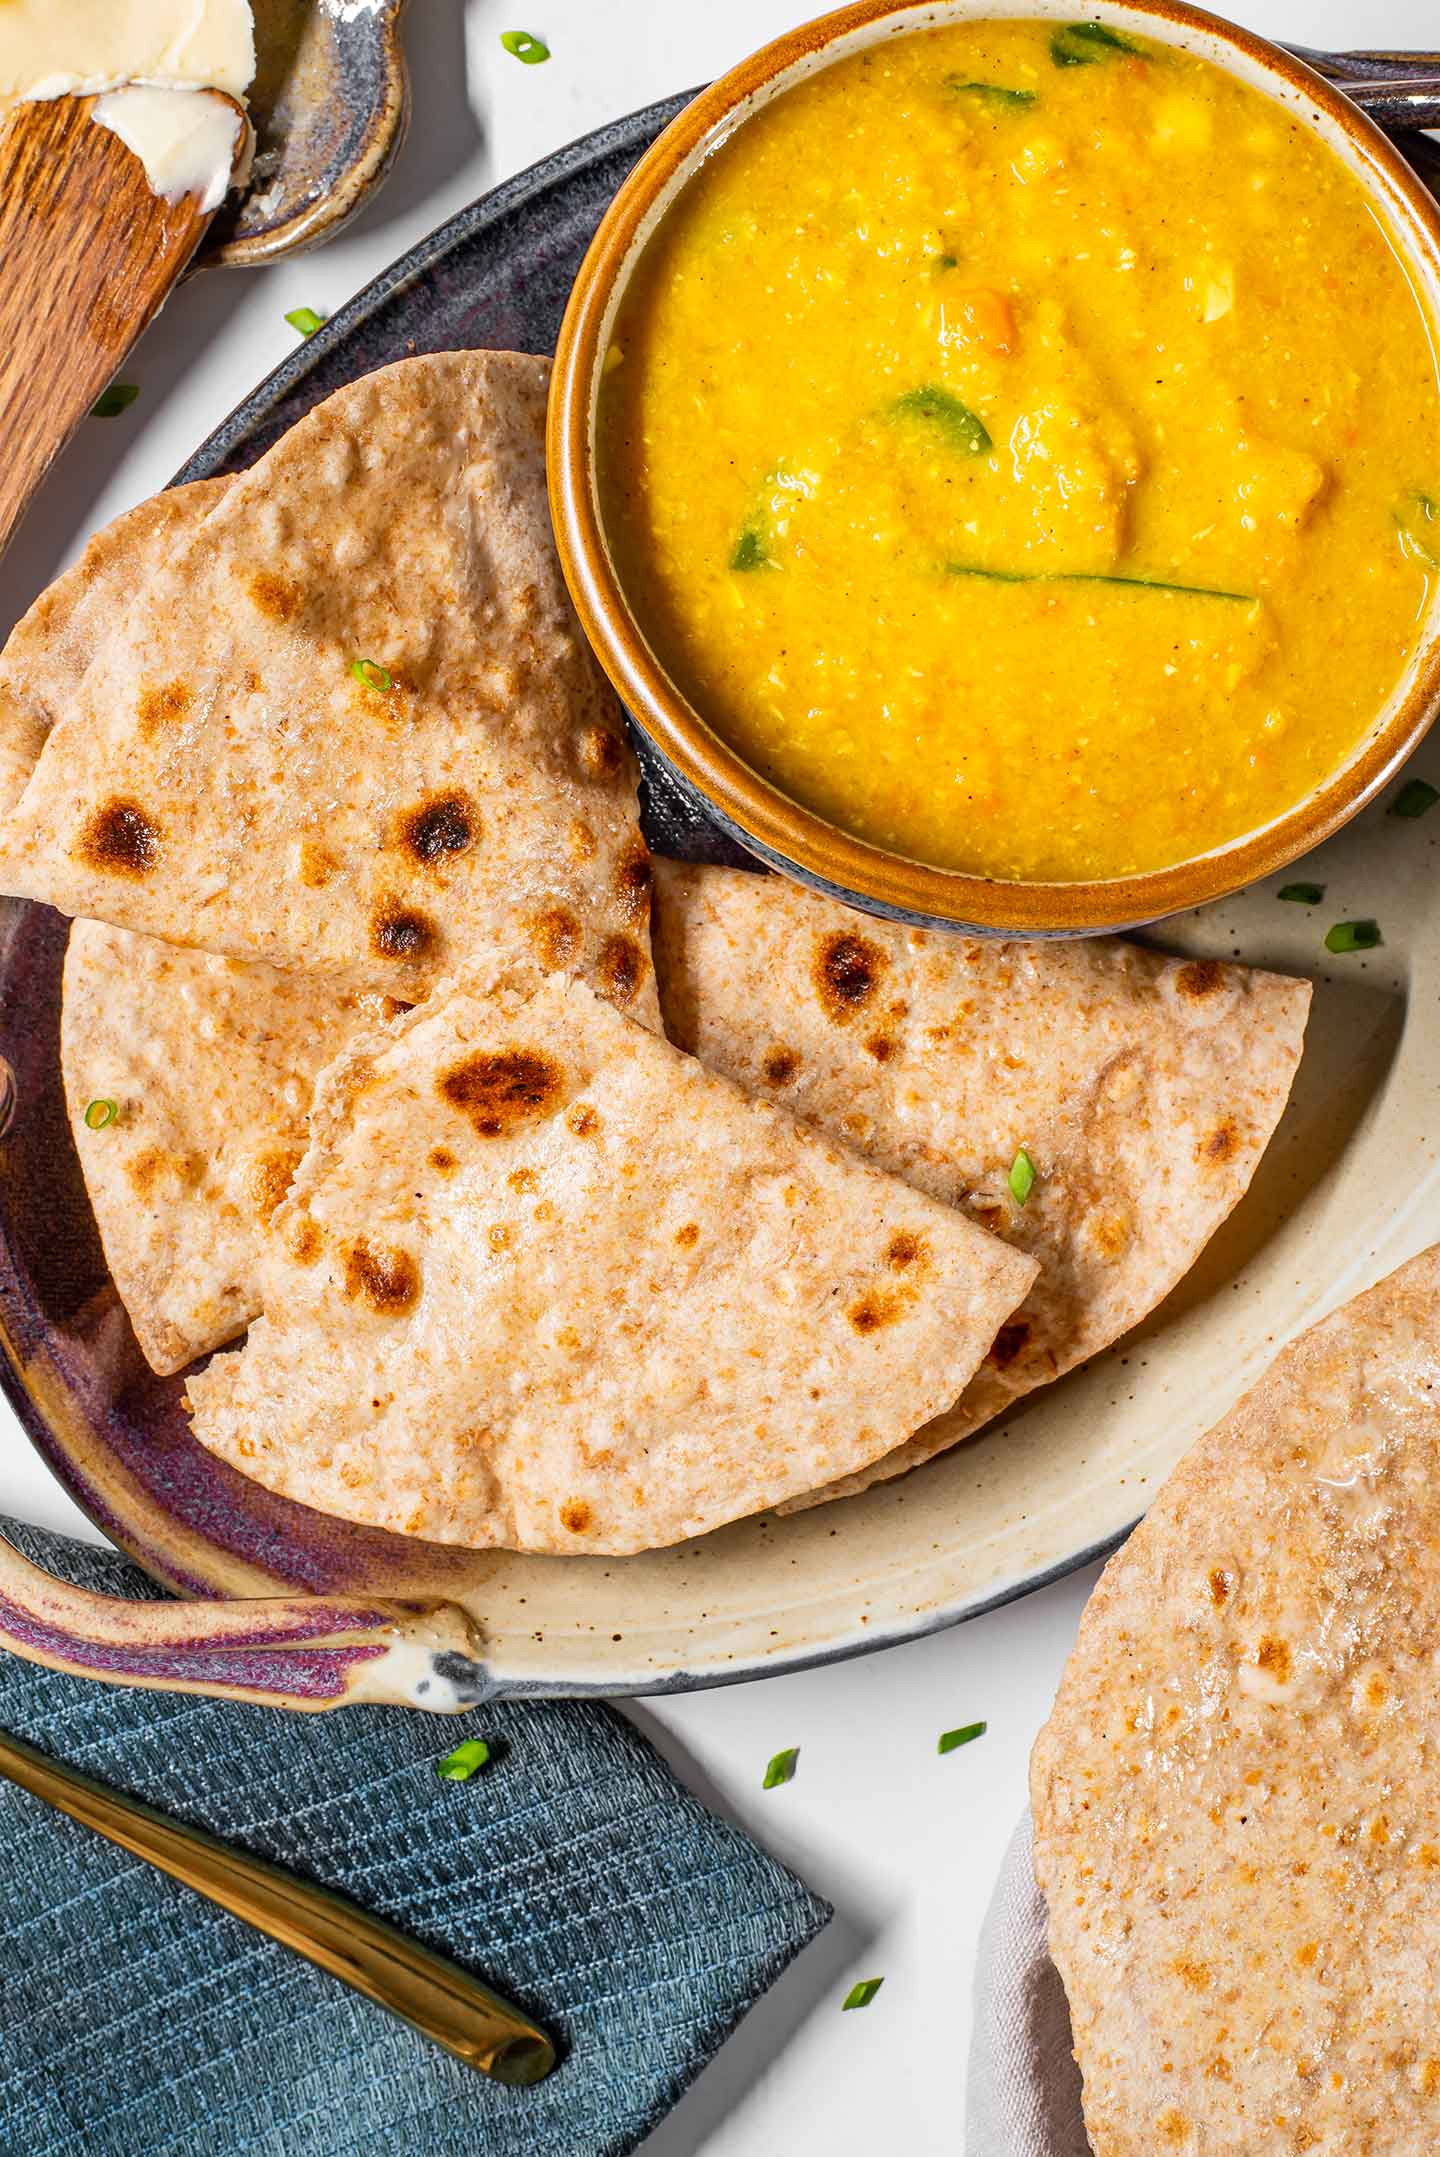 The Best Roti Pan For Home: Your Own Tawa For Roti